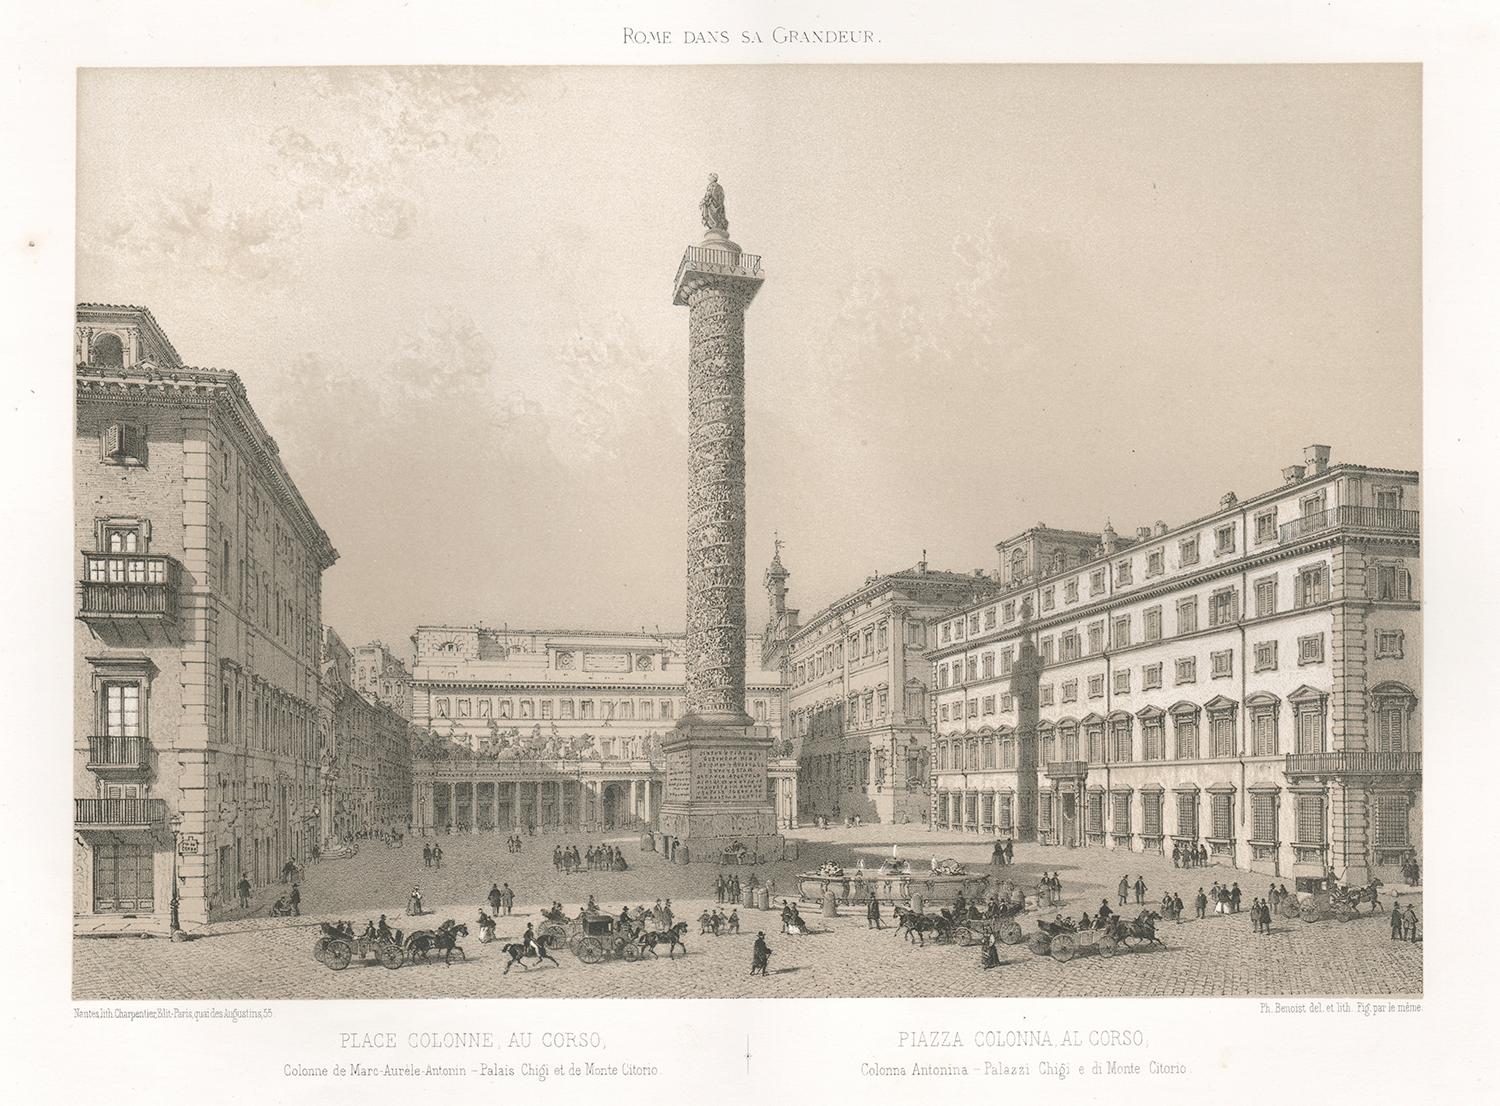 Piazza Colonna, Rome, Italy. Lithograph by Philippe Benoist